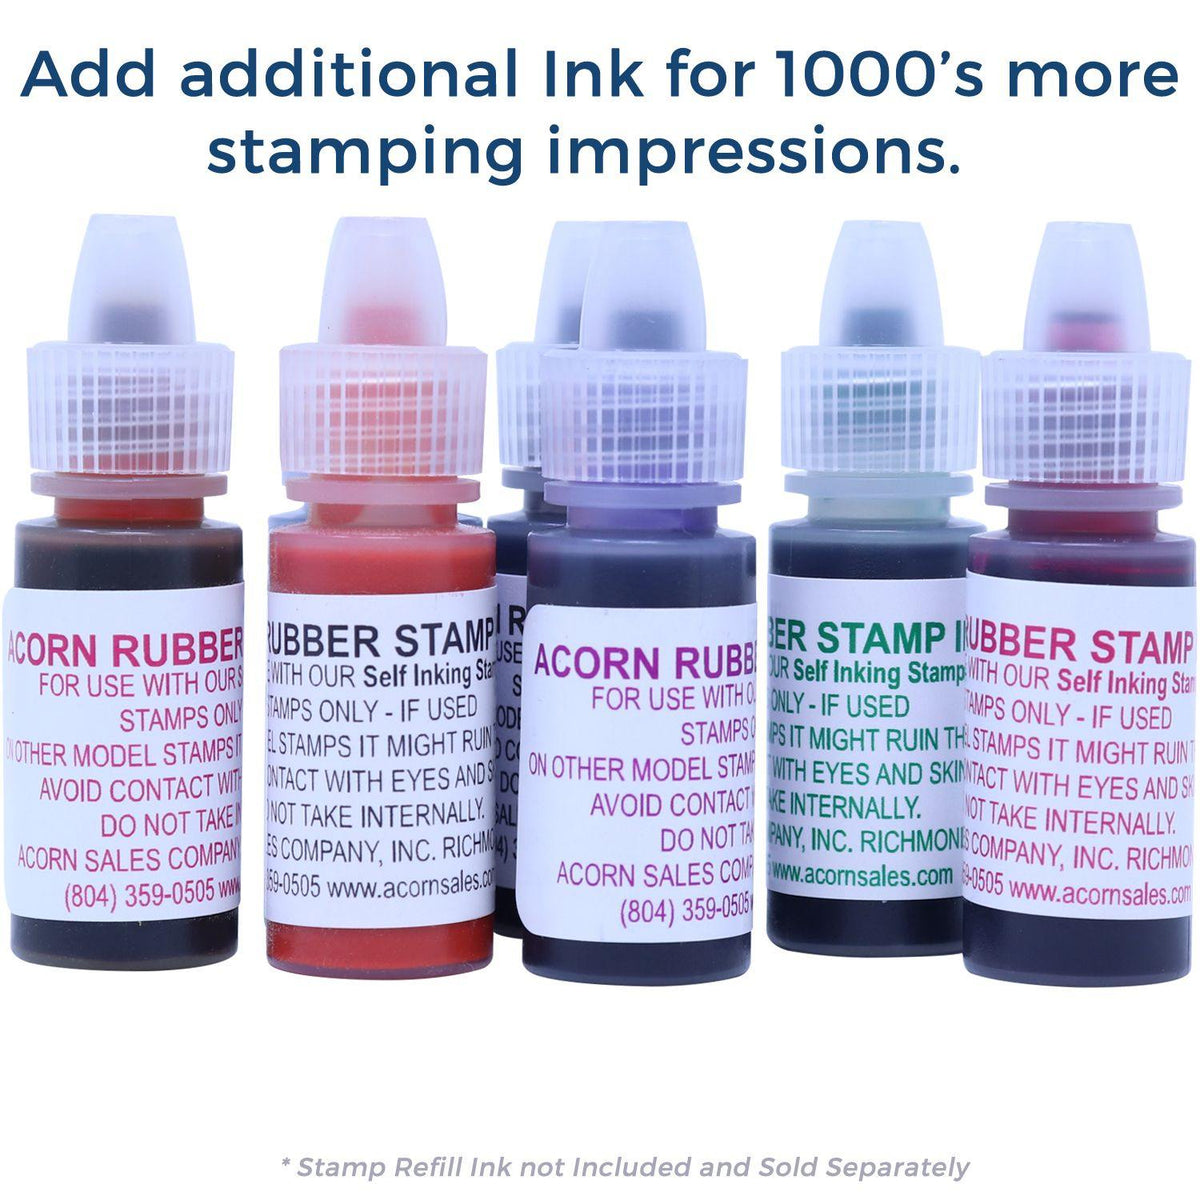 Refill Inks for Large Pre-Inked Standard Mail Stamp Available